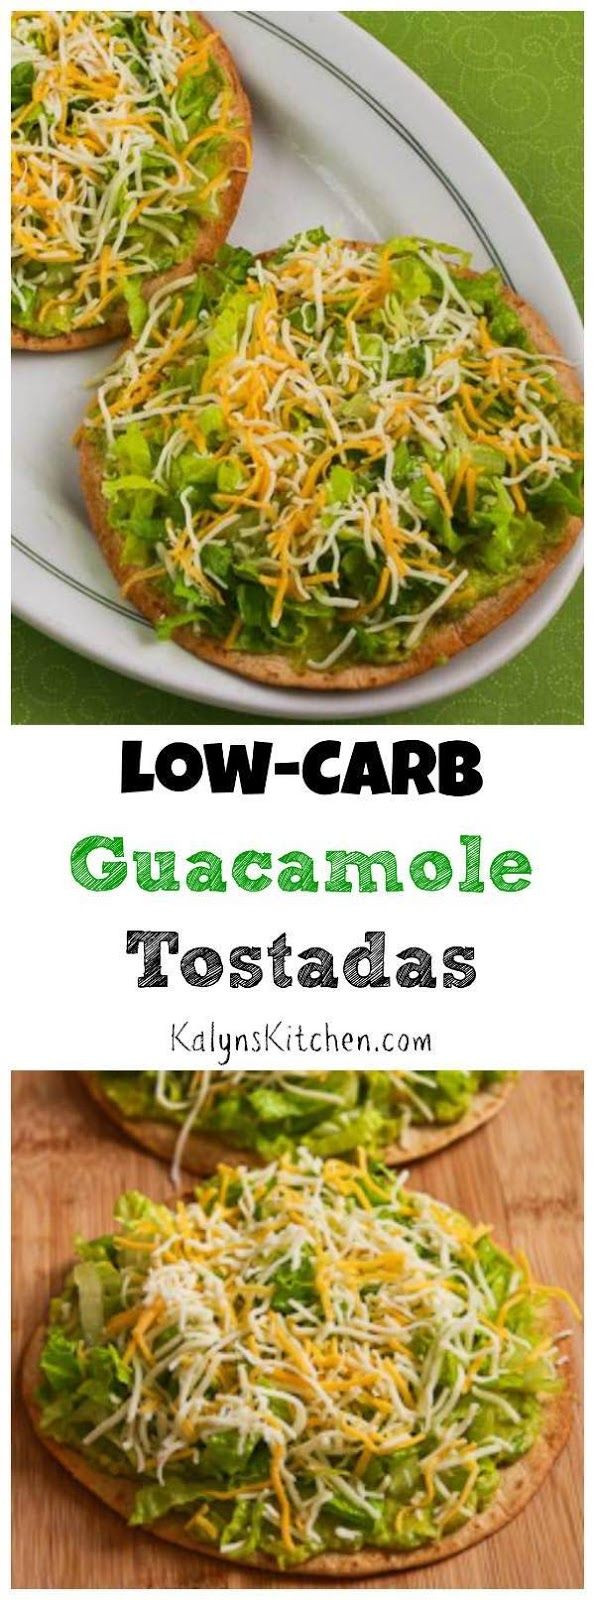 Low Carb High Protein Vegetarian Recipes
 25 best ideas about Lettuce types on Pinterest